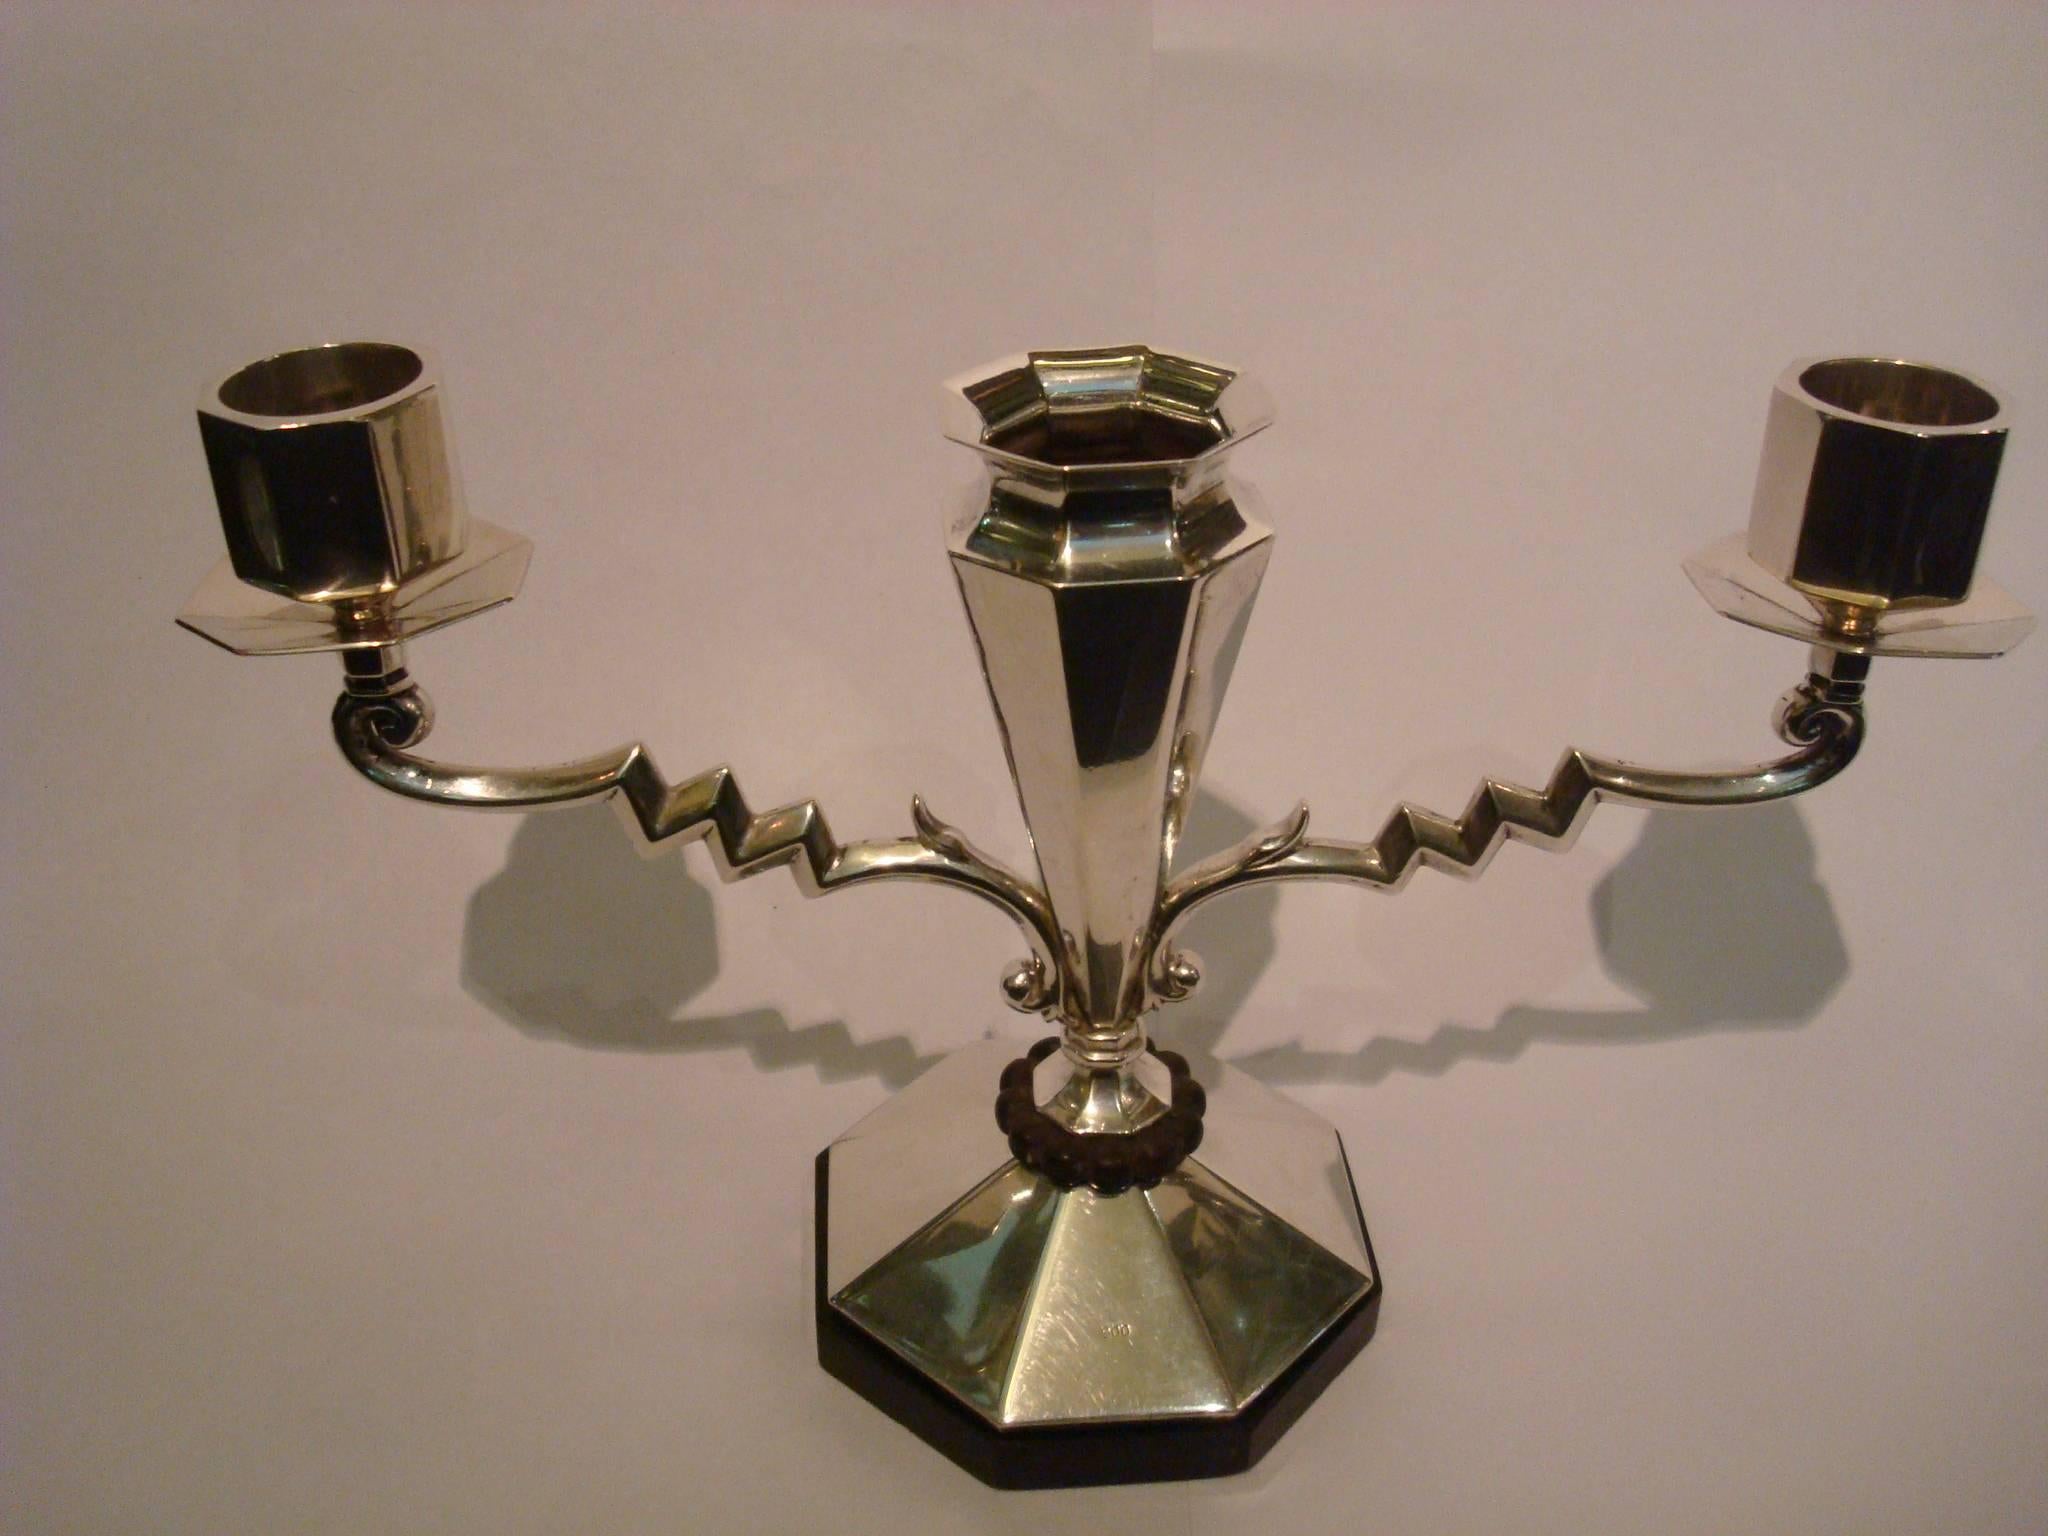 Pair of Art Deco Silver Candleholders with Flower Vase in the Middle For Sale 1